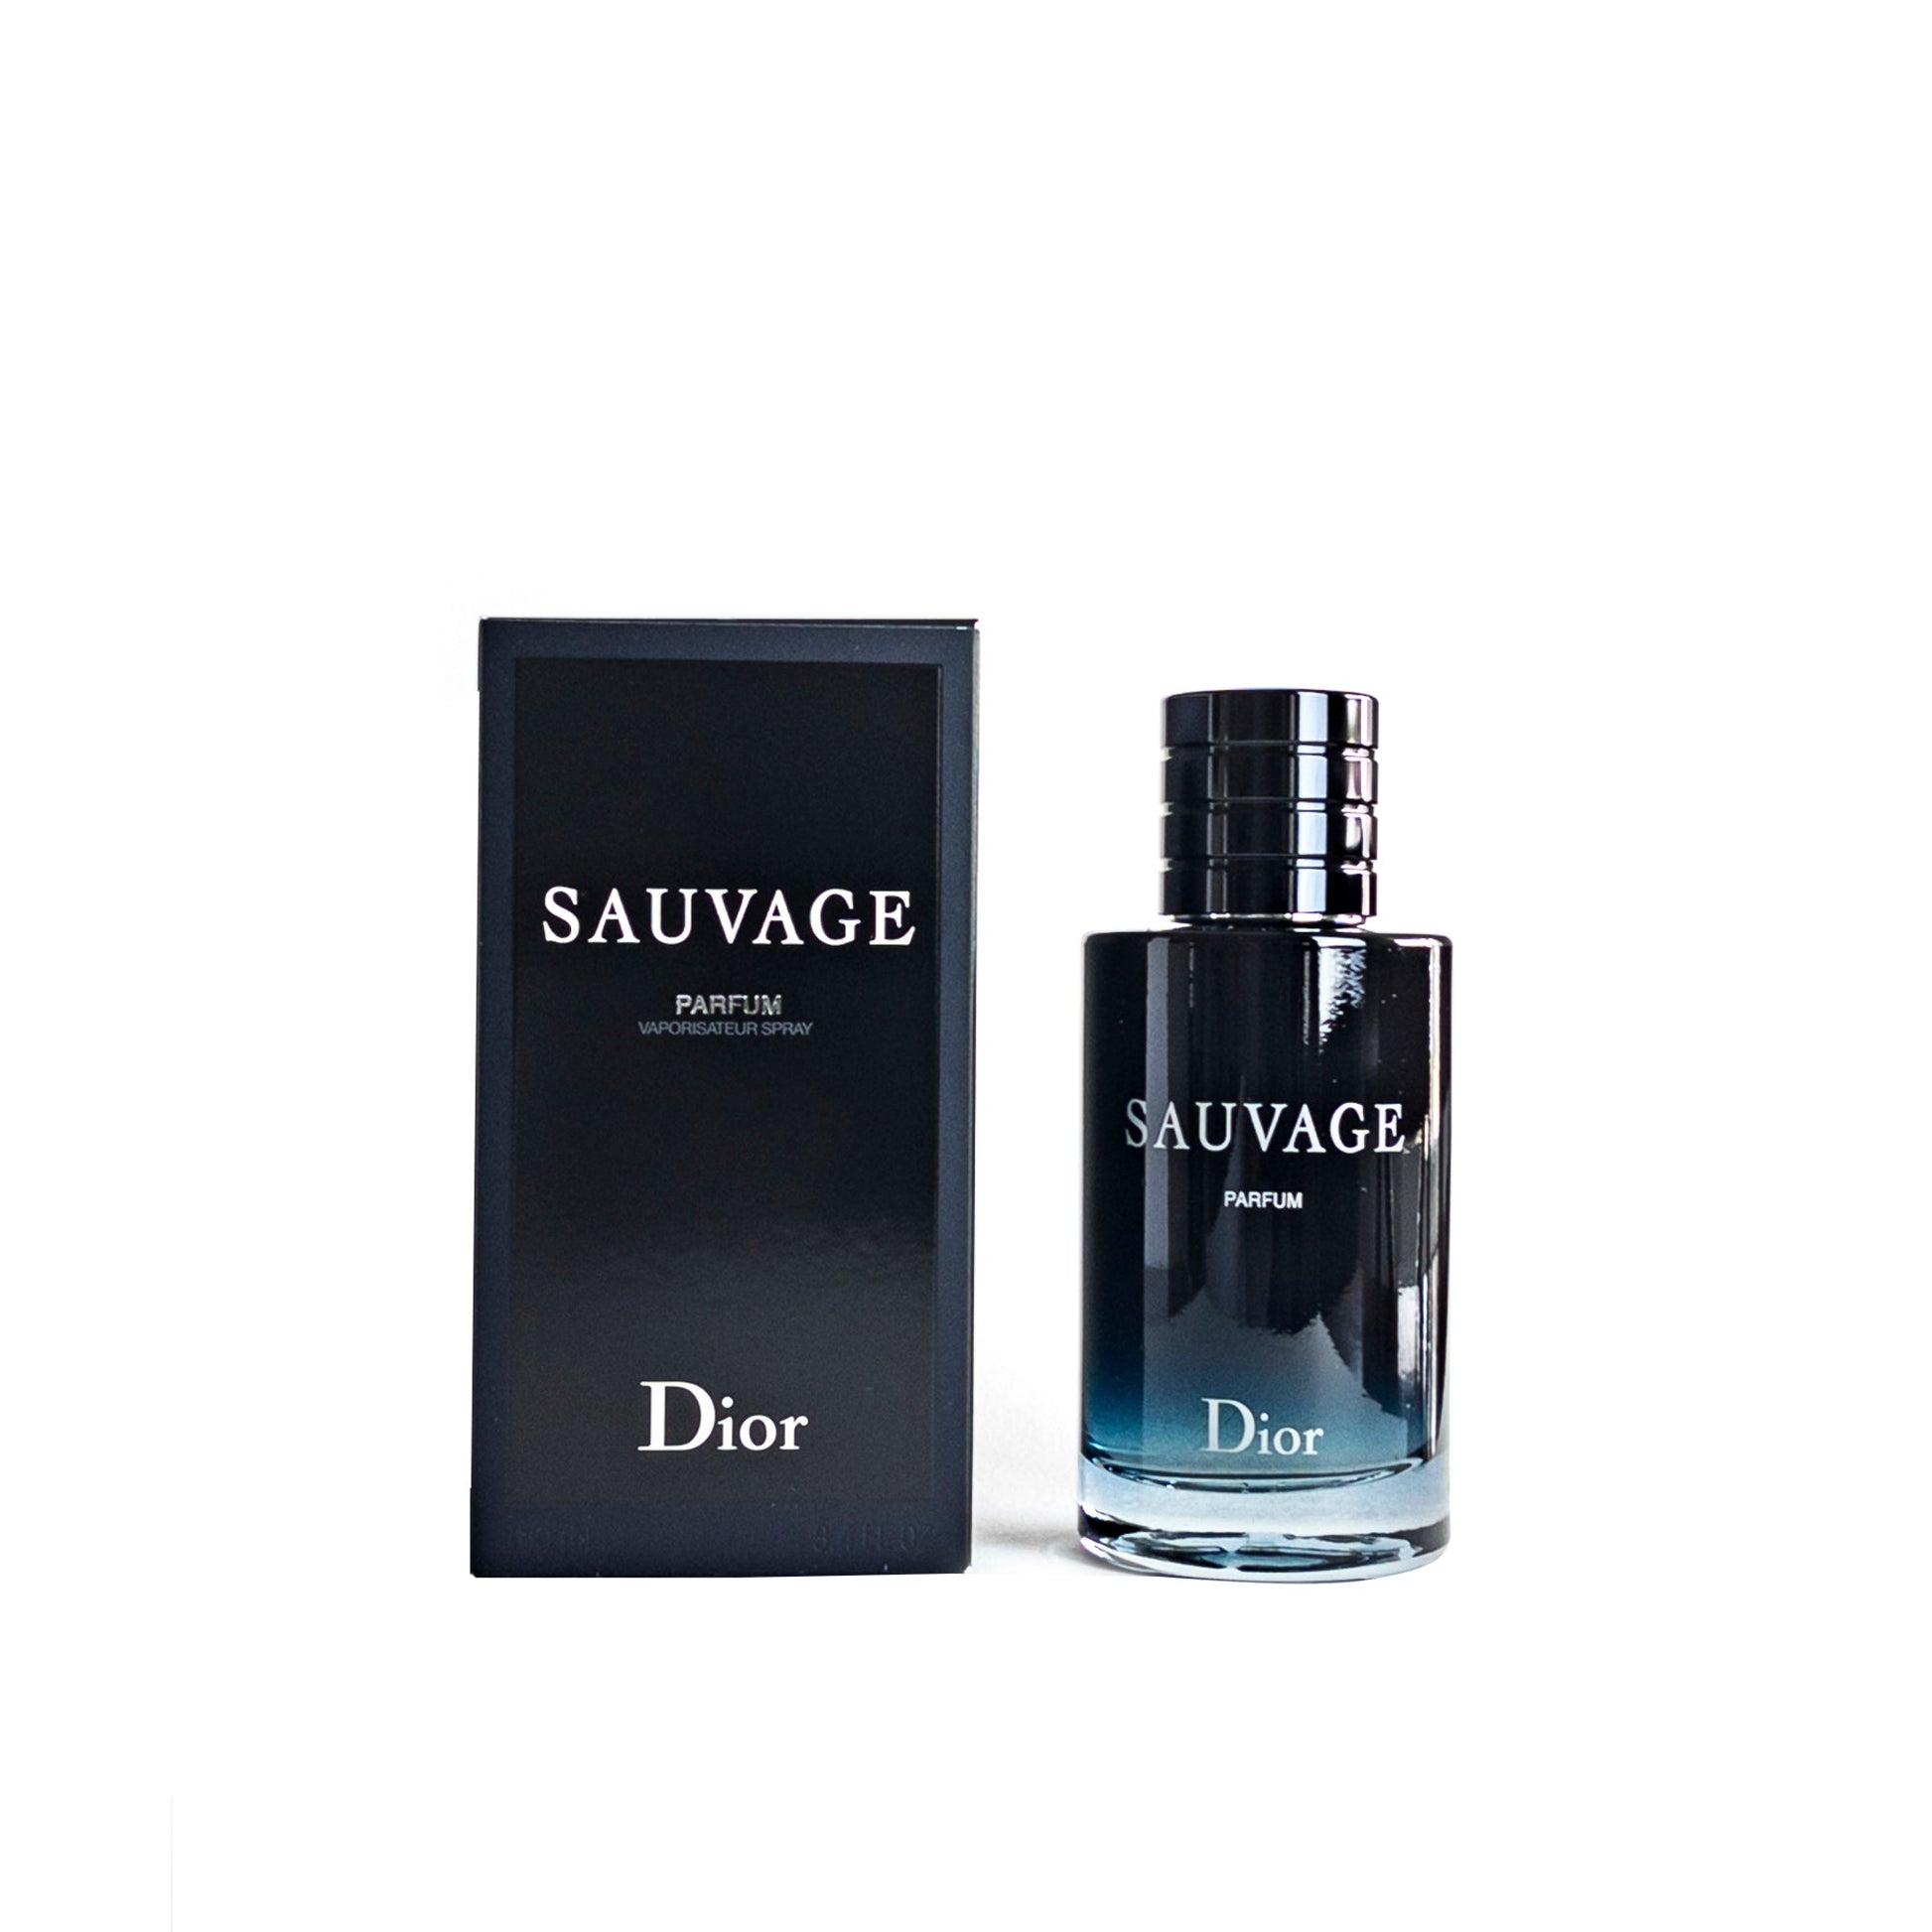 Sauvage Parfum Spray for Men by Christian Dior, Product image 1